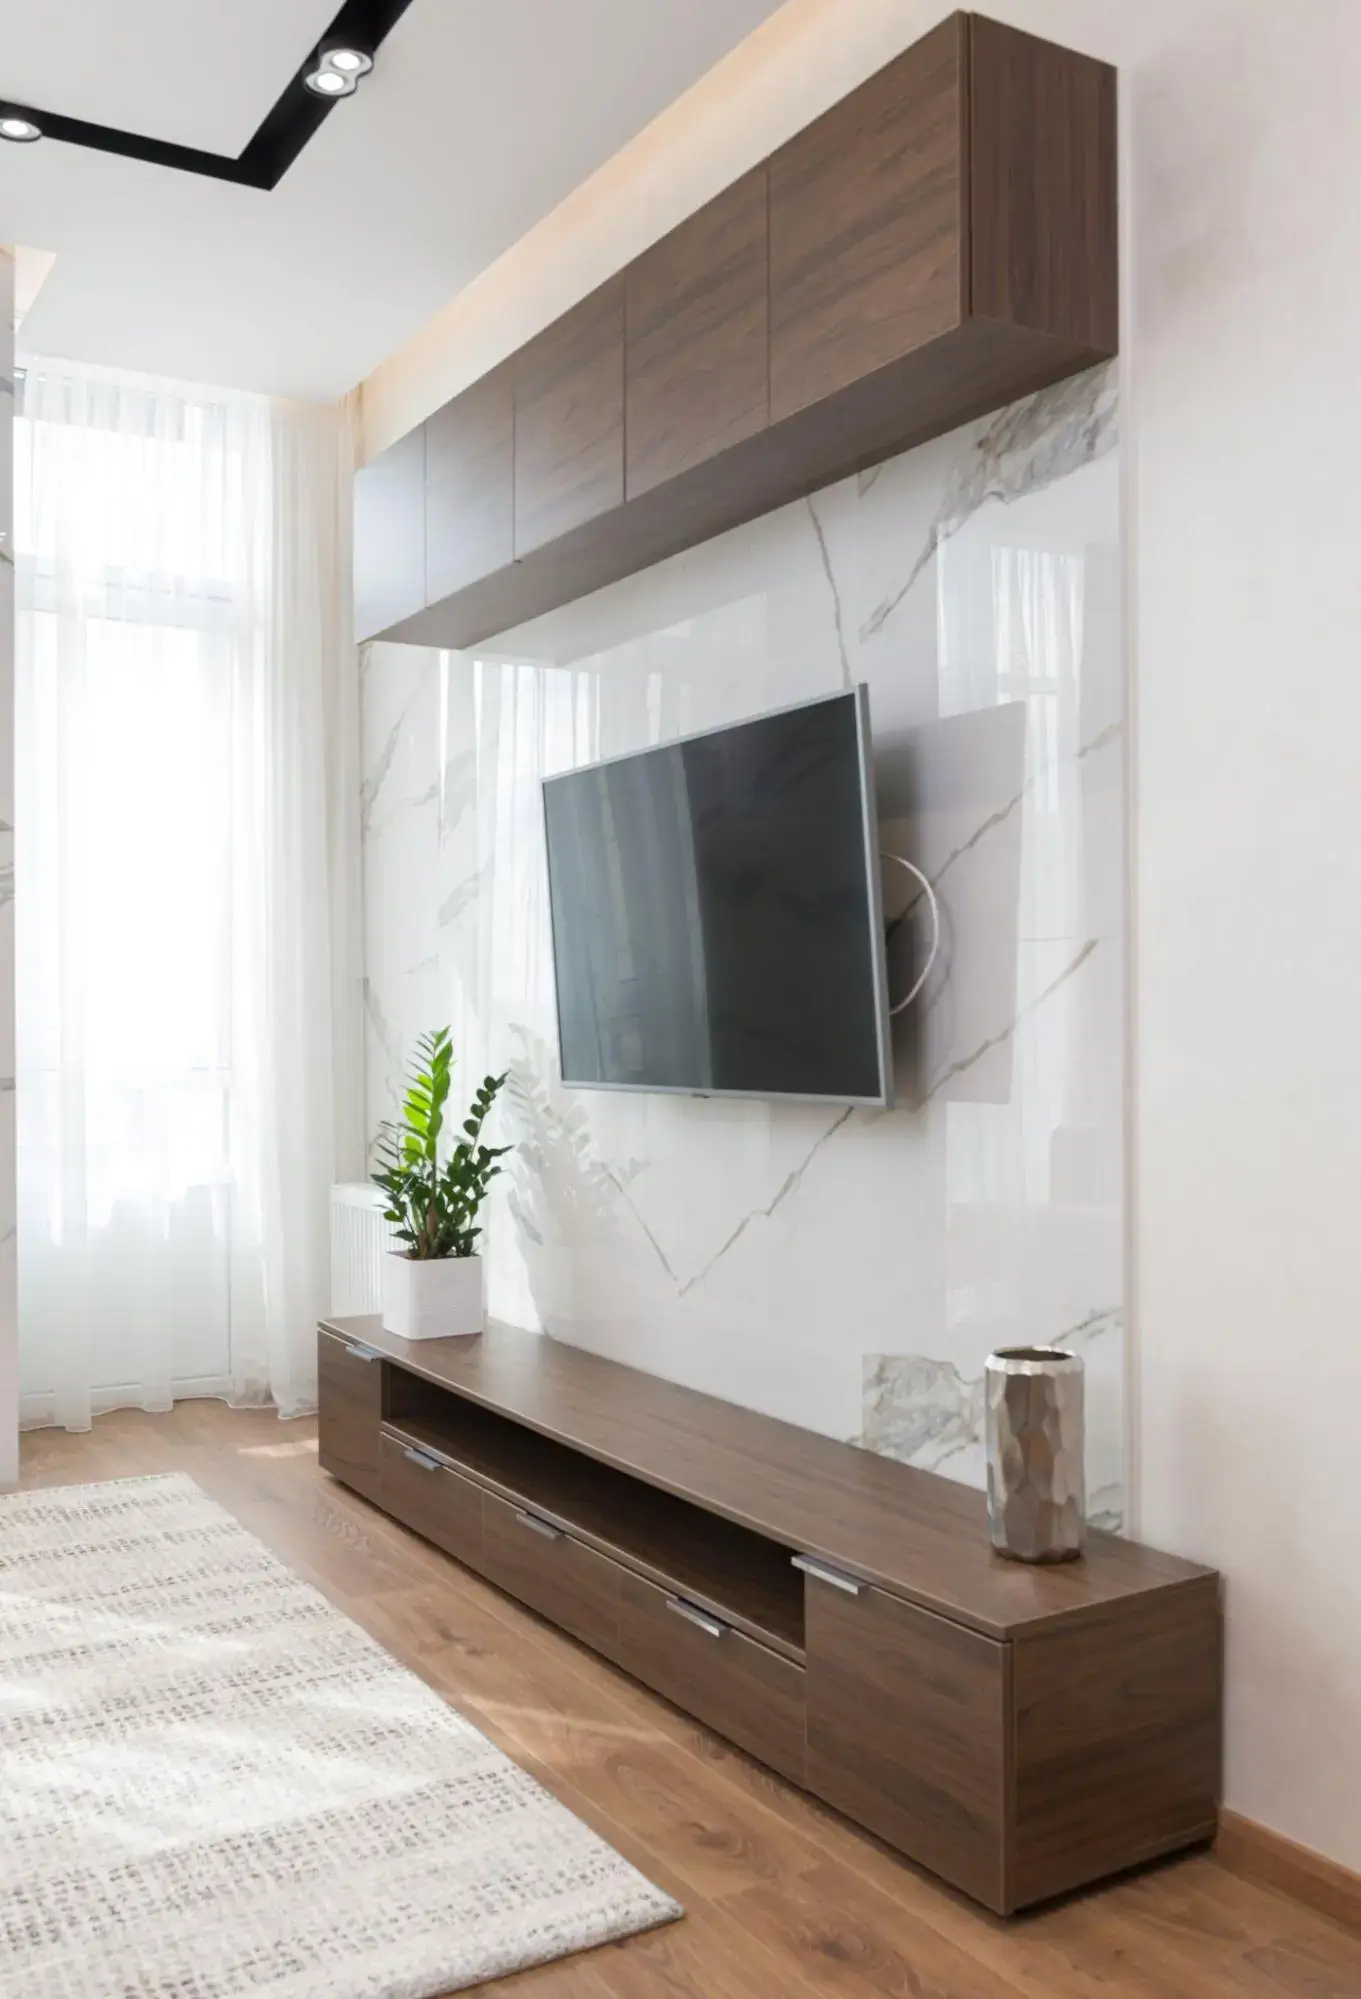 A large tv screen is installed on the wall in a sleek, modern living room. There is a wooden entertainment unit below the tv with a houseplant and vase on it.